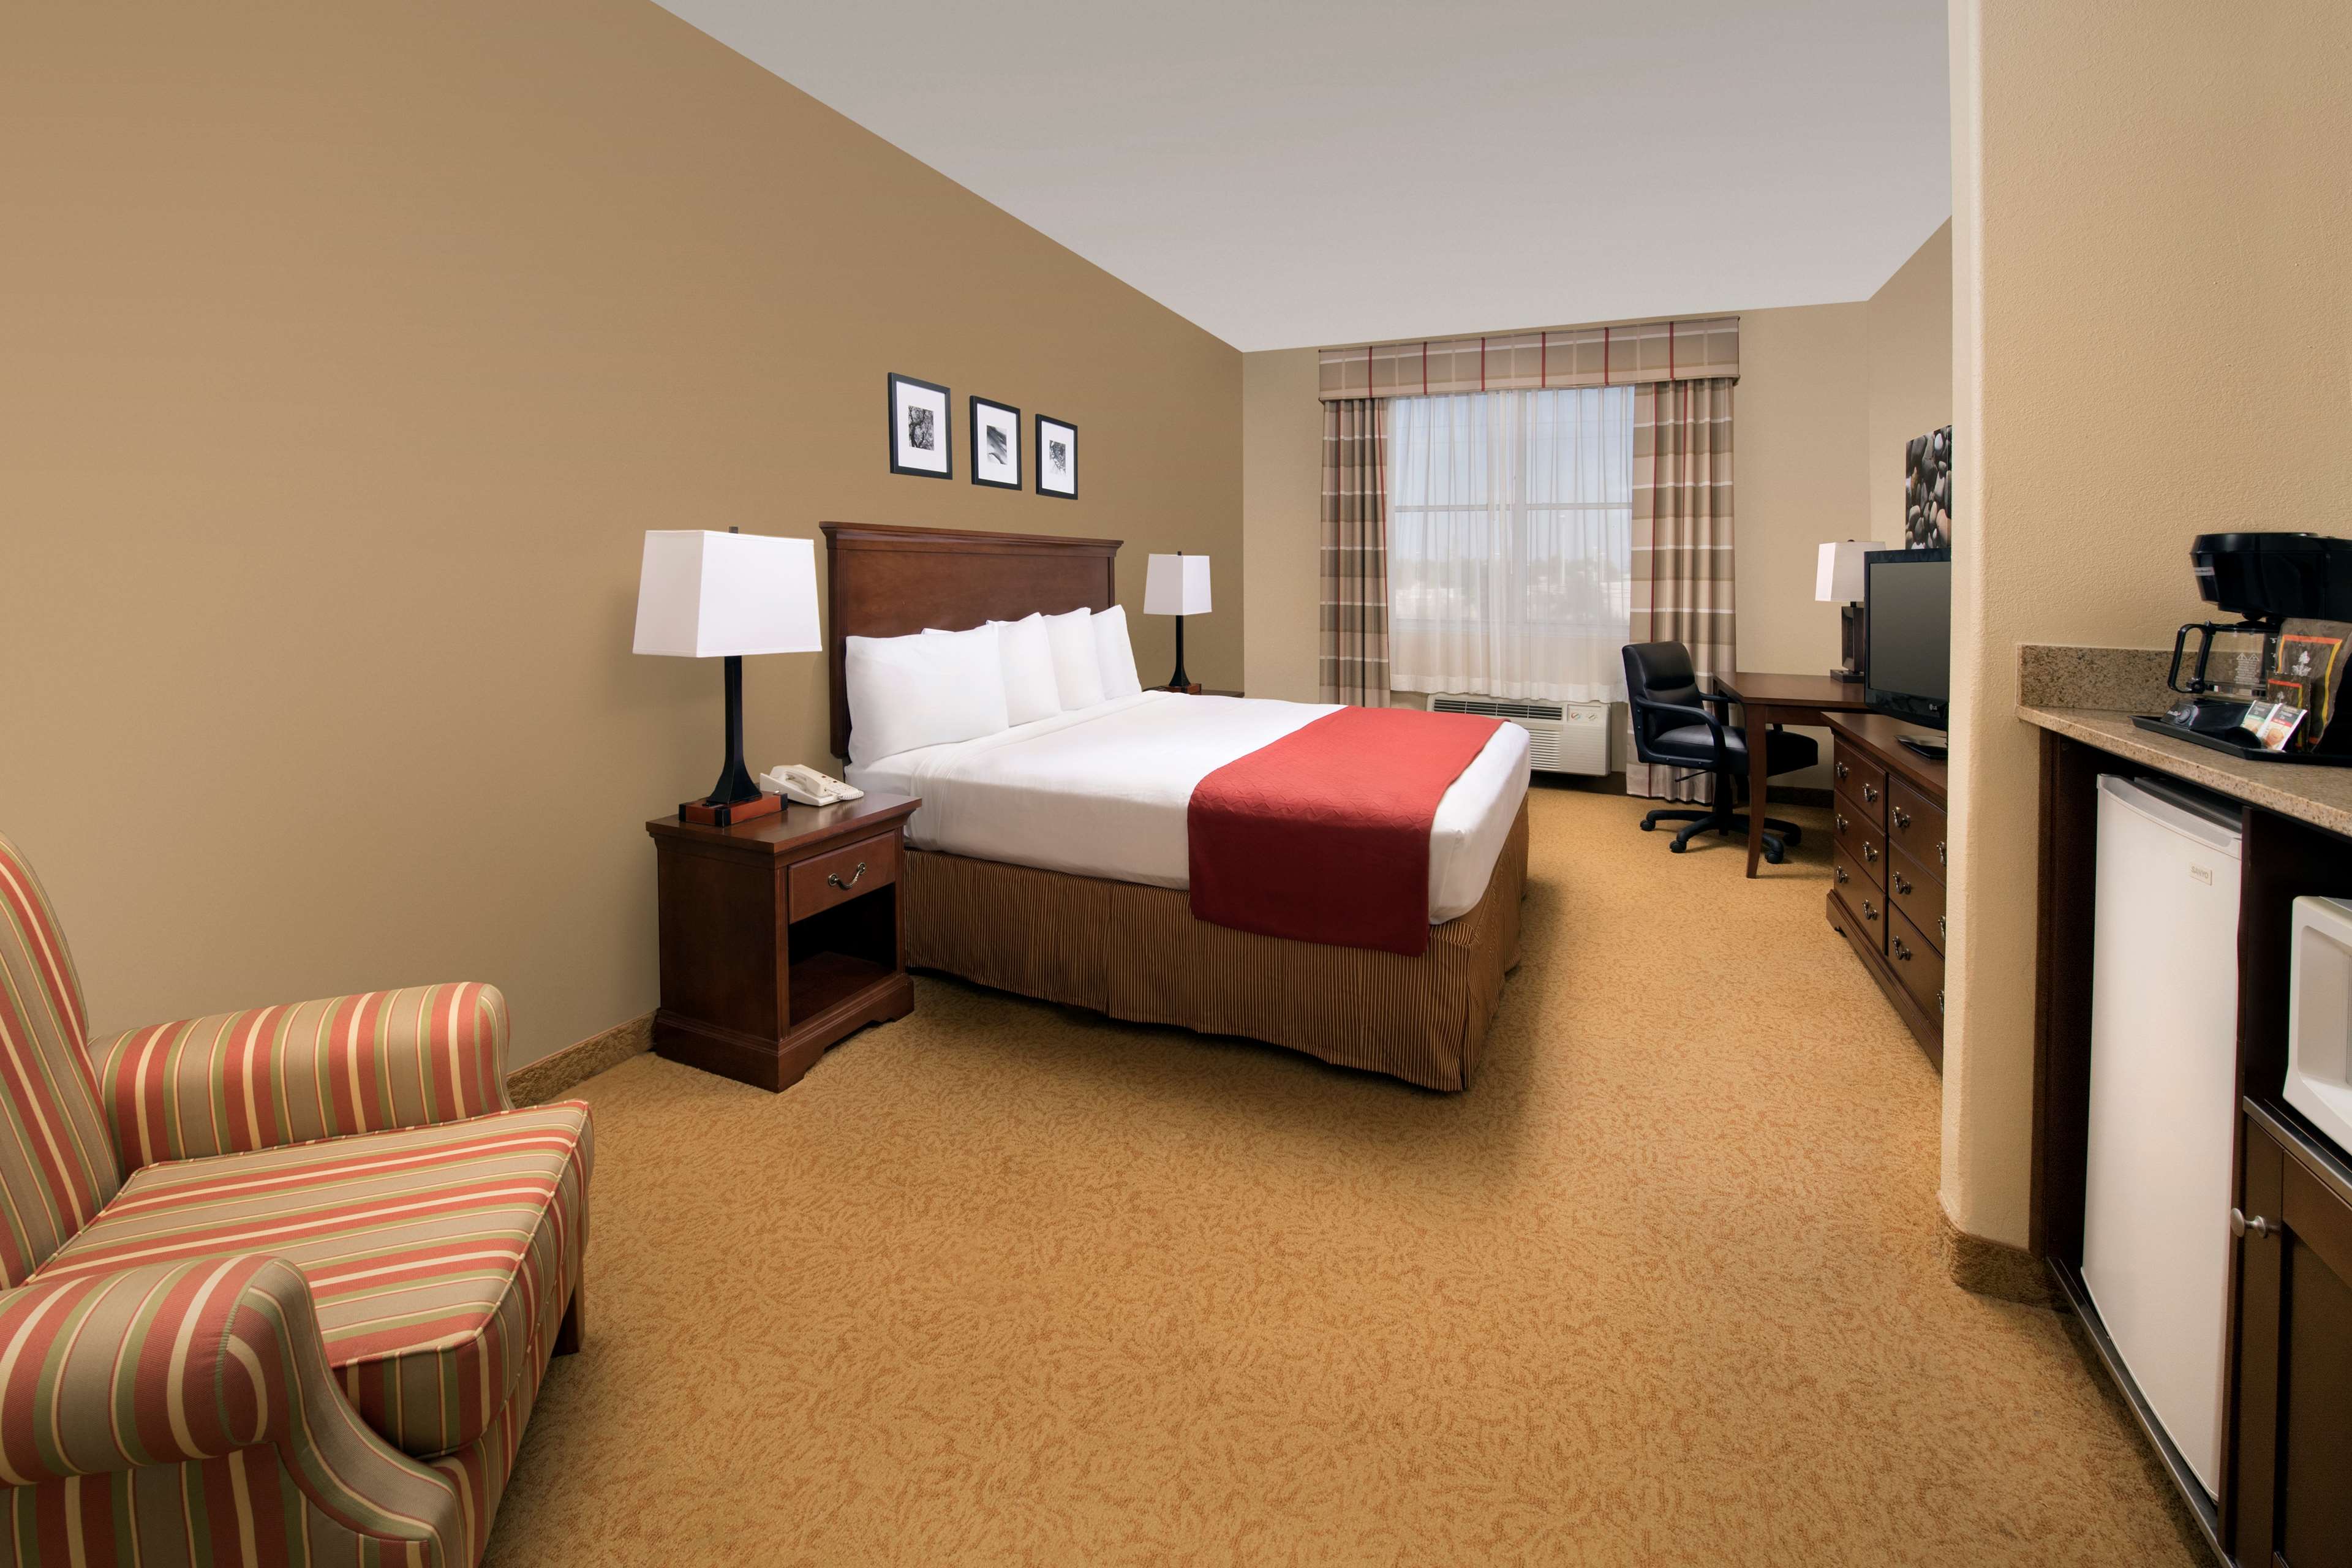 Country Inn & Suites by Radisson, Houston Intercontinental Airport East, TX Photo